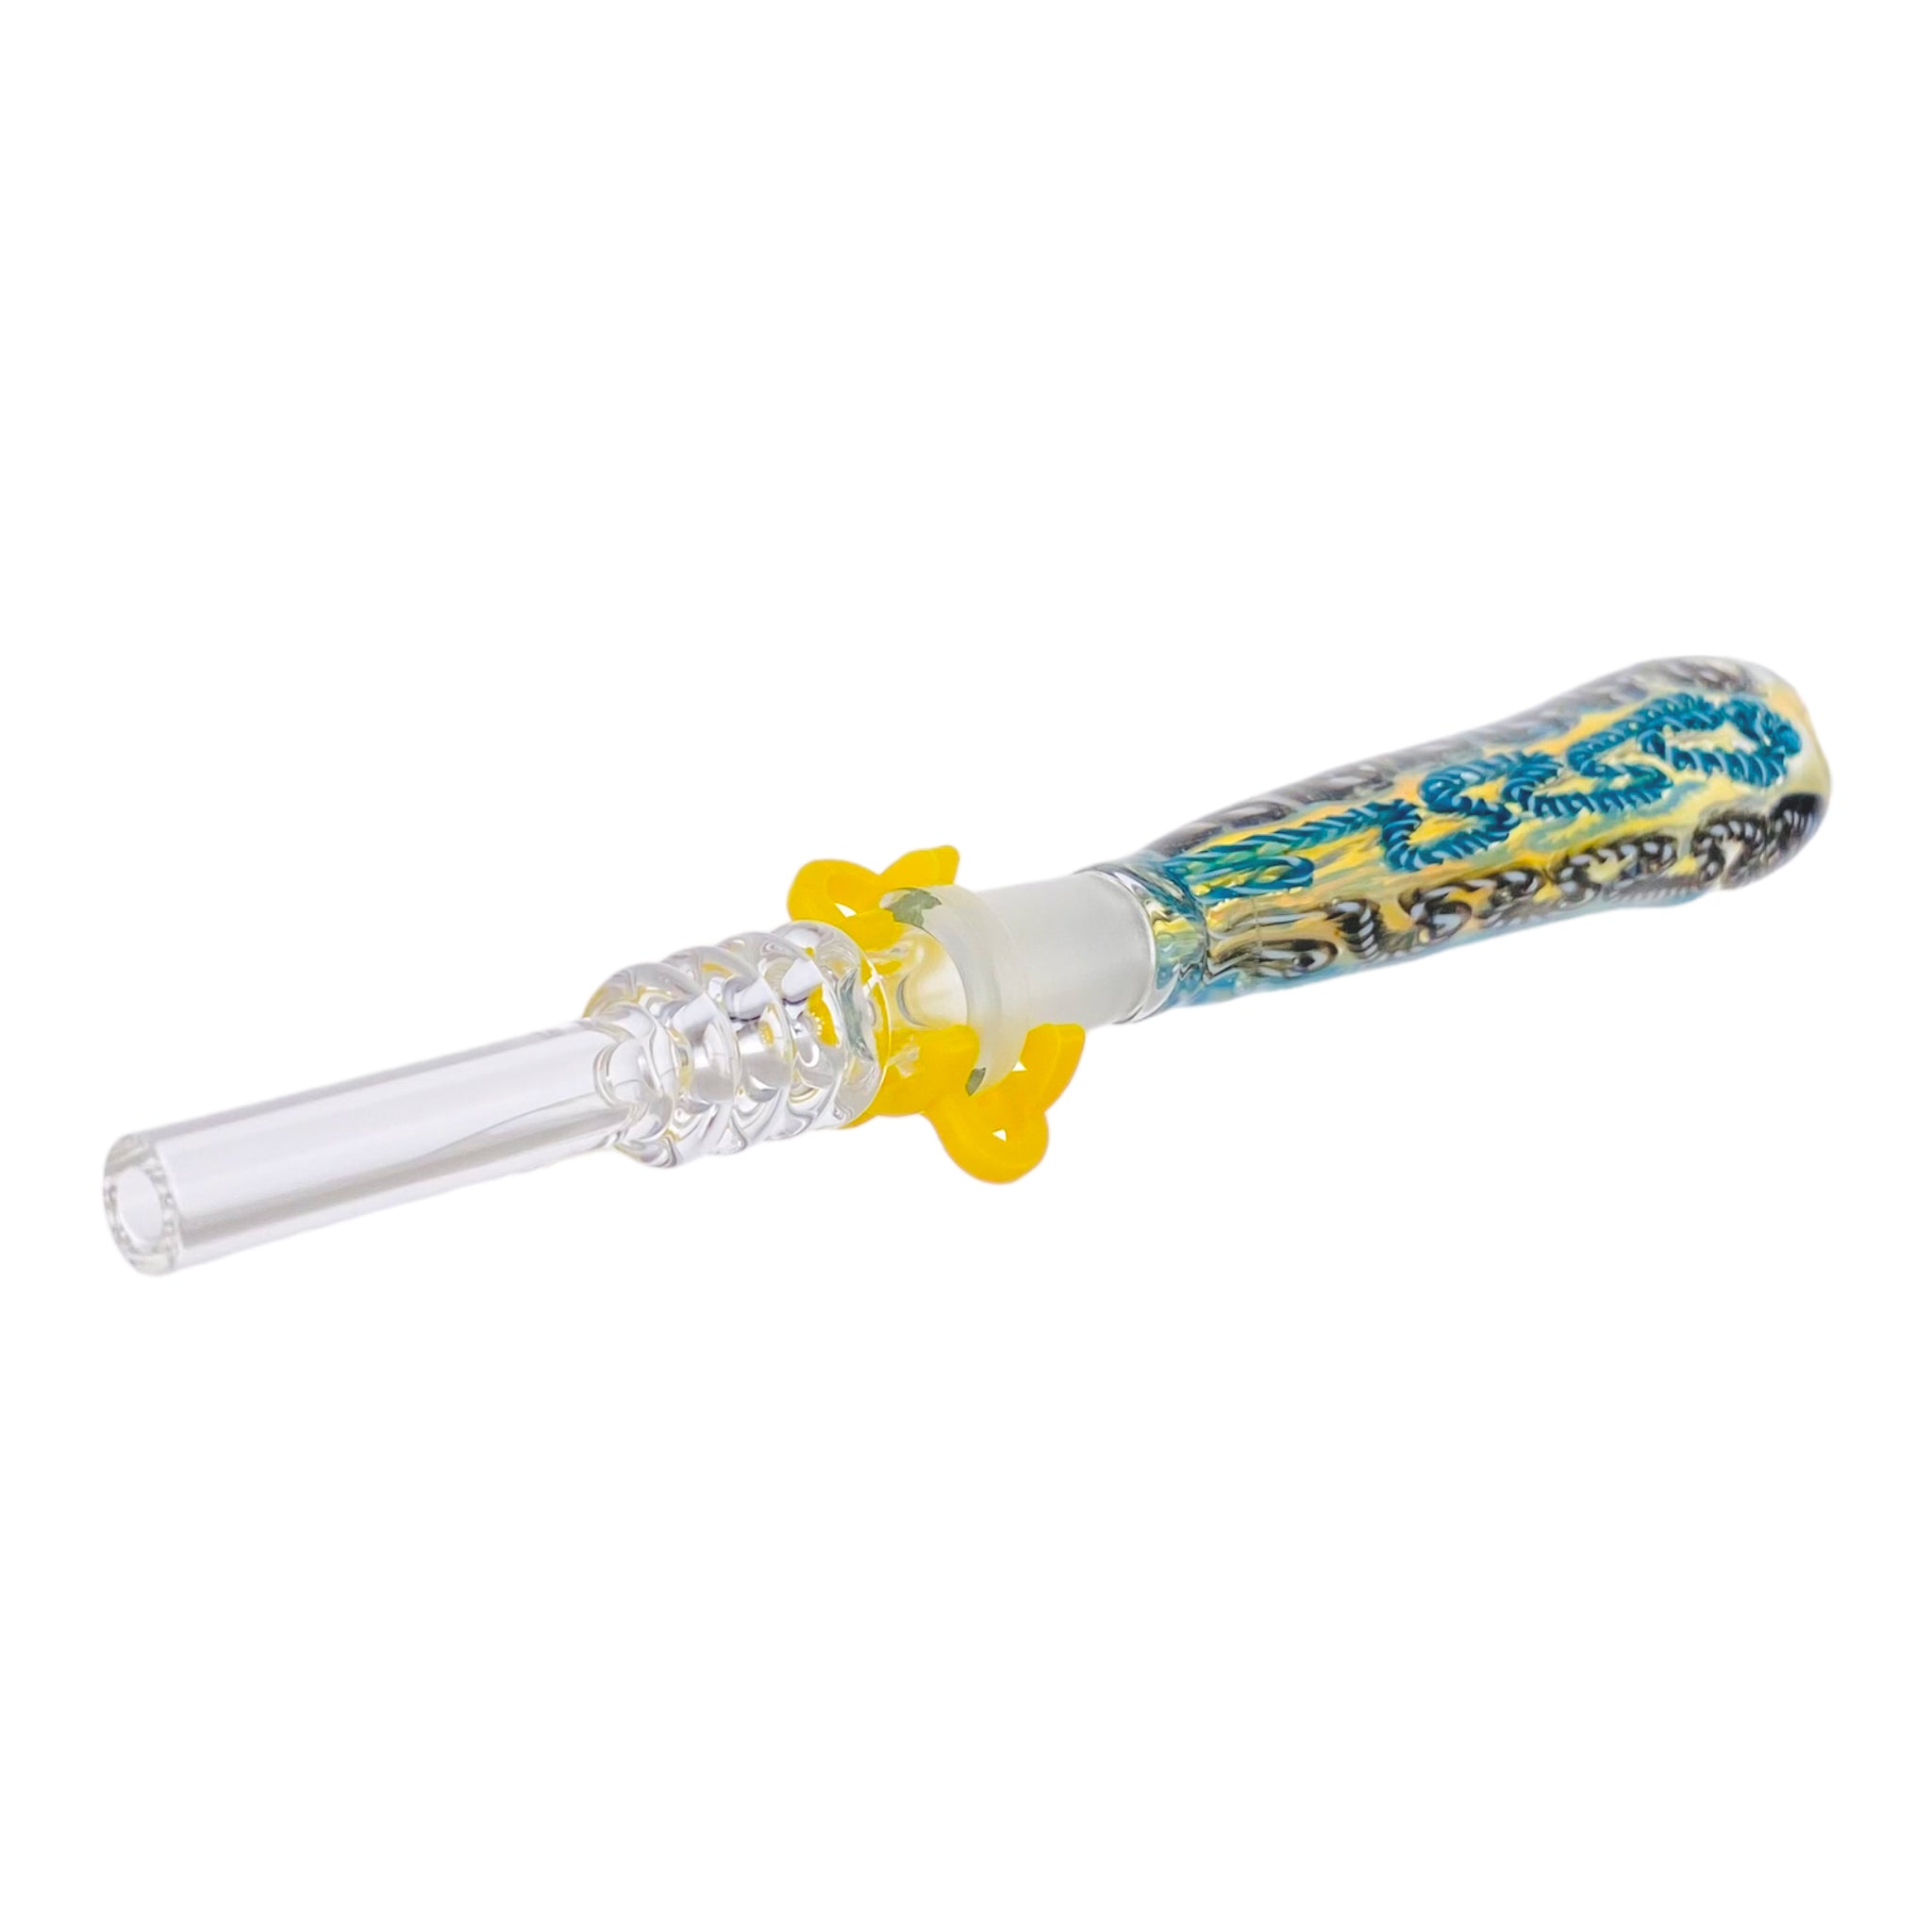 10mm Nectar Collector - Blue And Black Squiggle Inside Out With 10mm Quartz Tip